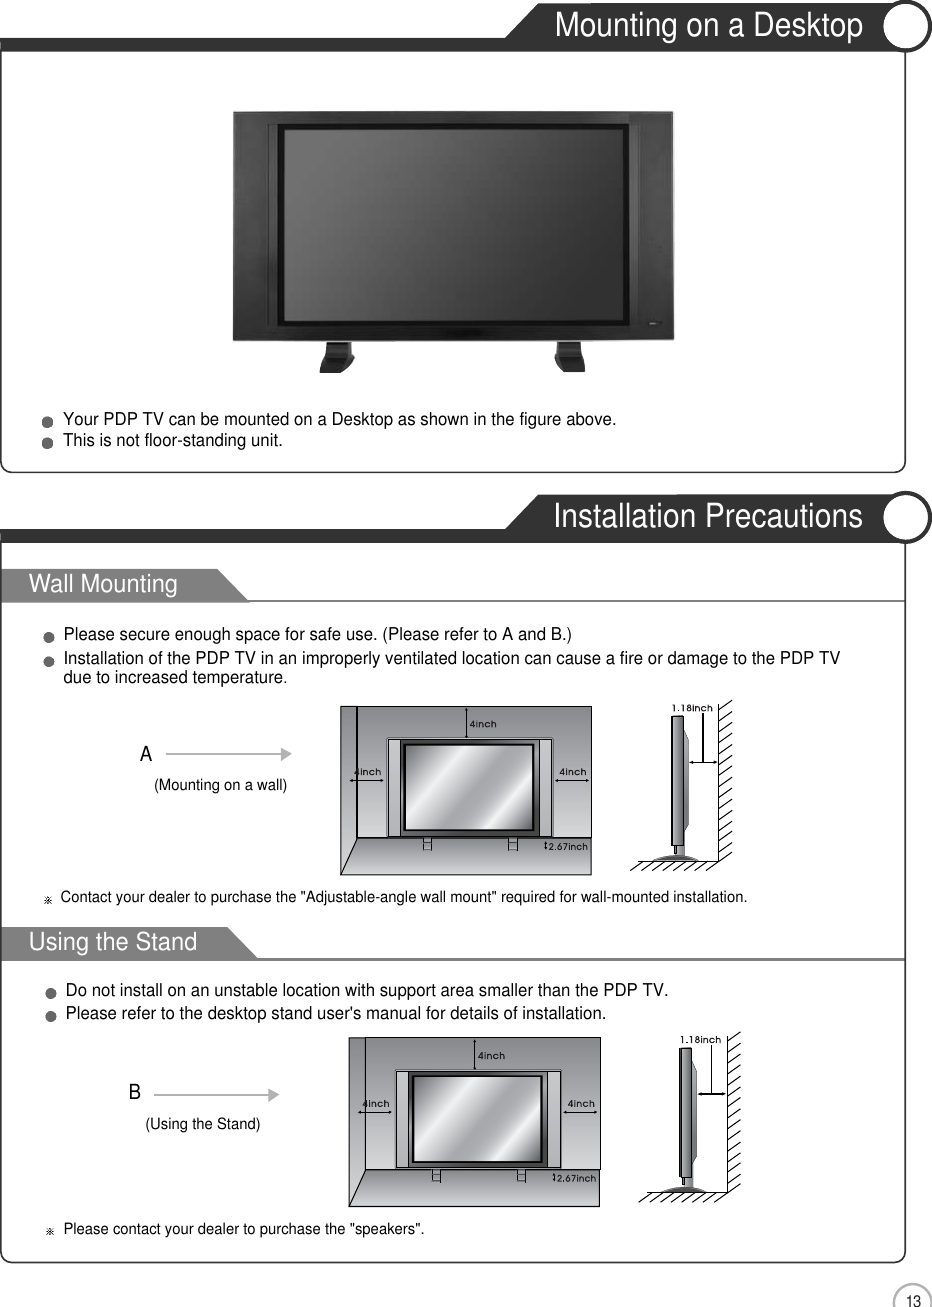 Wall MountingUsing the Stand13Mounting on a DesktopInstallation PrecautionsUser Guidance InformationYour PDP TV can be mounted on a Desktop as shown in the figure above.This is not floor-standing unit.Please secure enough space for safe use. (Please refer to A and B.)Installation of the PDP TV in an improperly ventilated location can cause a fire or damage to the PDP TVdue to increased temperature.Do not install on an unstable location with support area smaller than the PDP TV.Please refer to the desktop stand user&apos;s manual for details of installation.Contact your dealer to purchase the &quot;Adjustable-angle wall mount&quot; required for wall-mounted installation.Please contact your dealer to purchase the &quot;speakers&quot;.(Mounting on a wall)A(Using the Stand)B